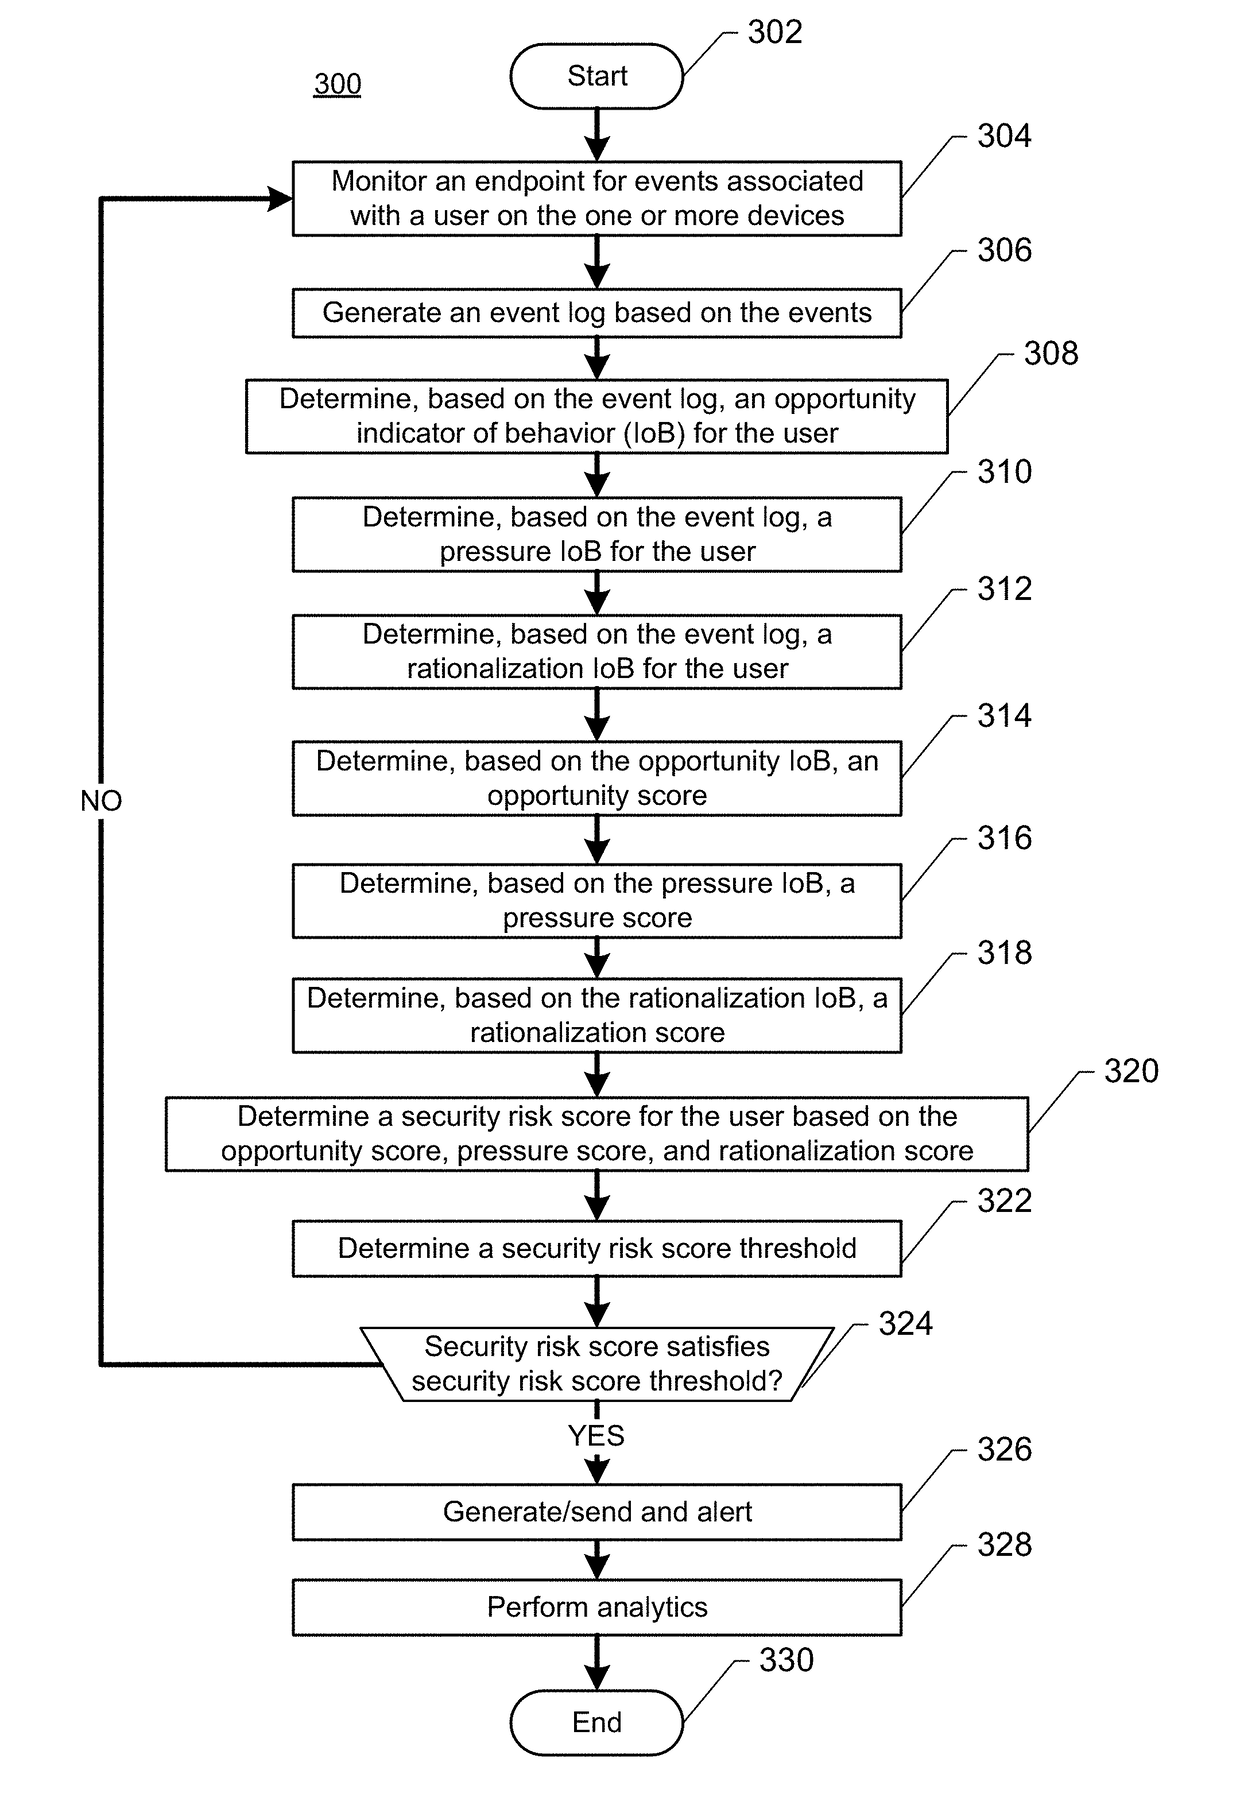 Automated computer behavioral analysis system and methods